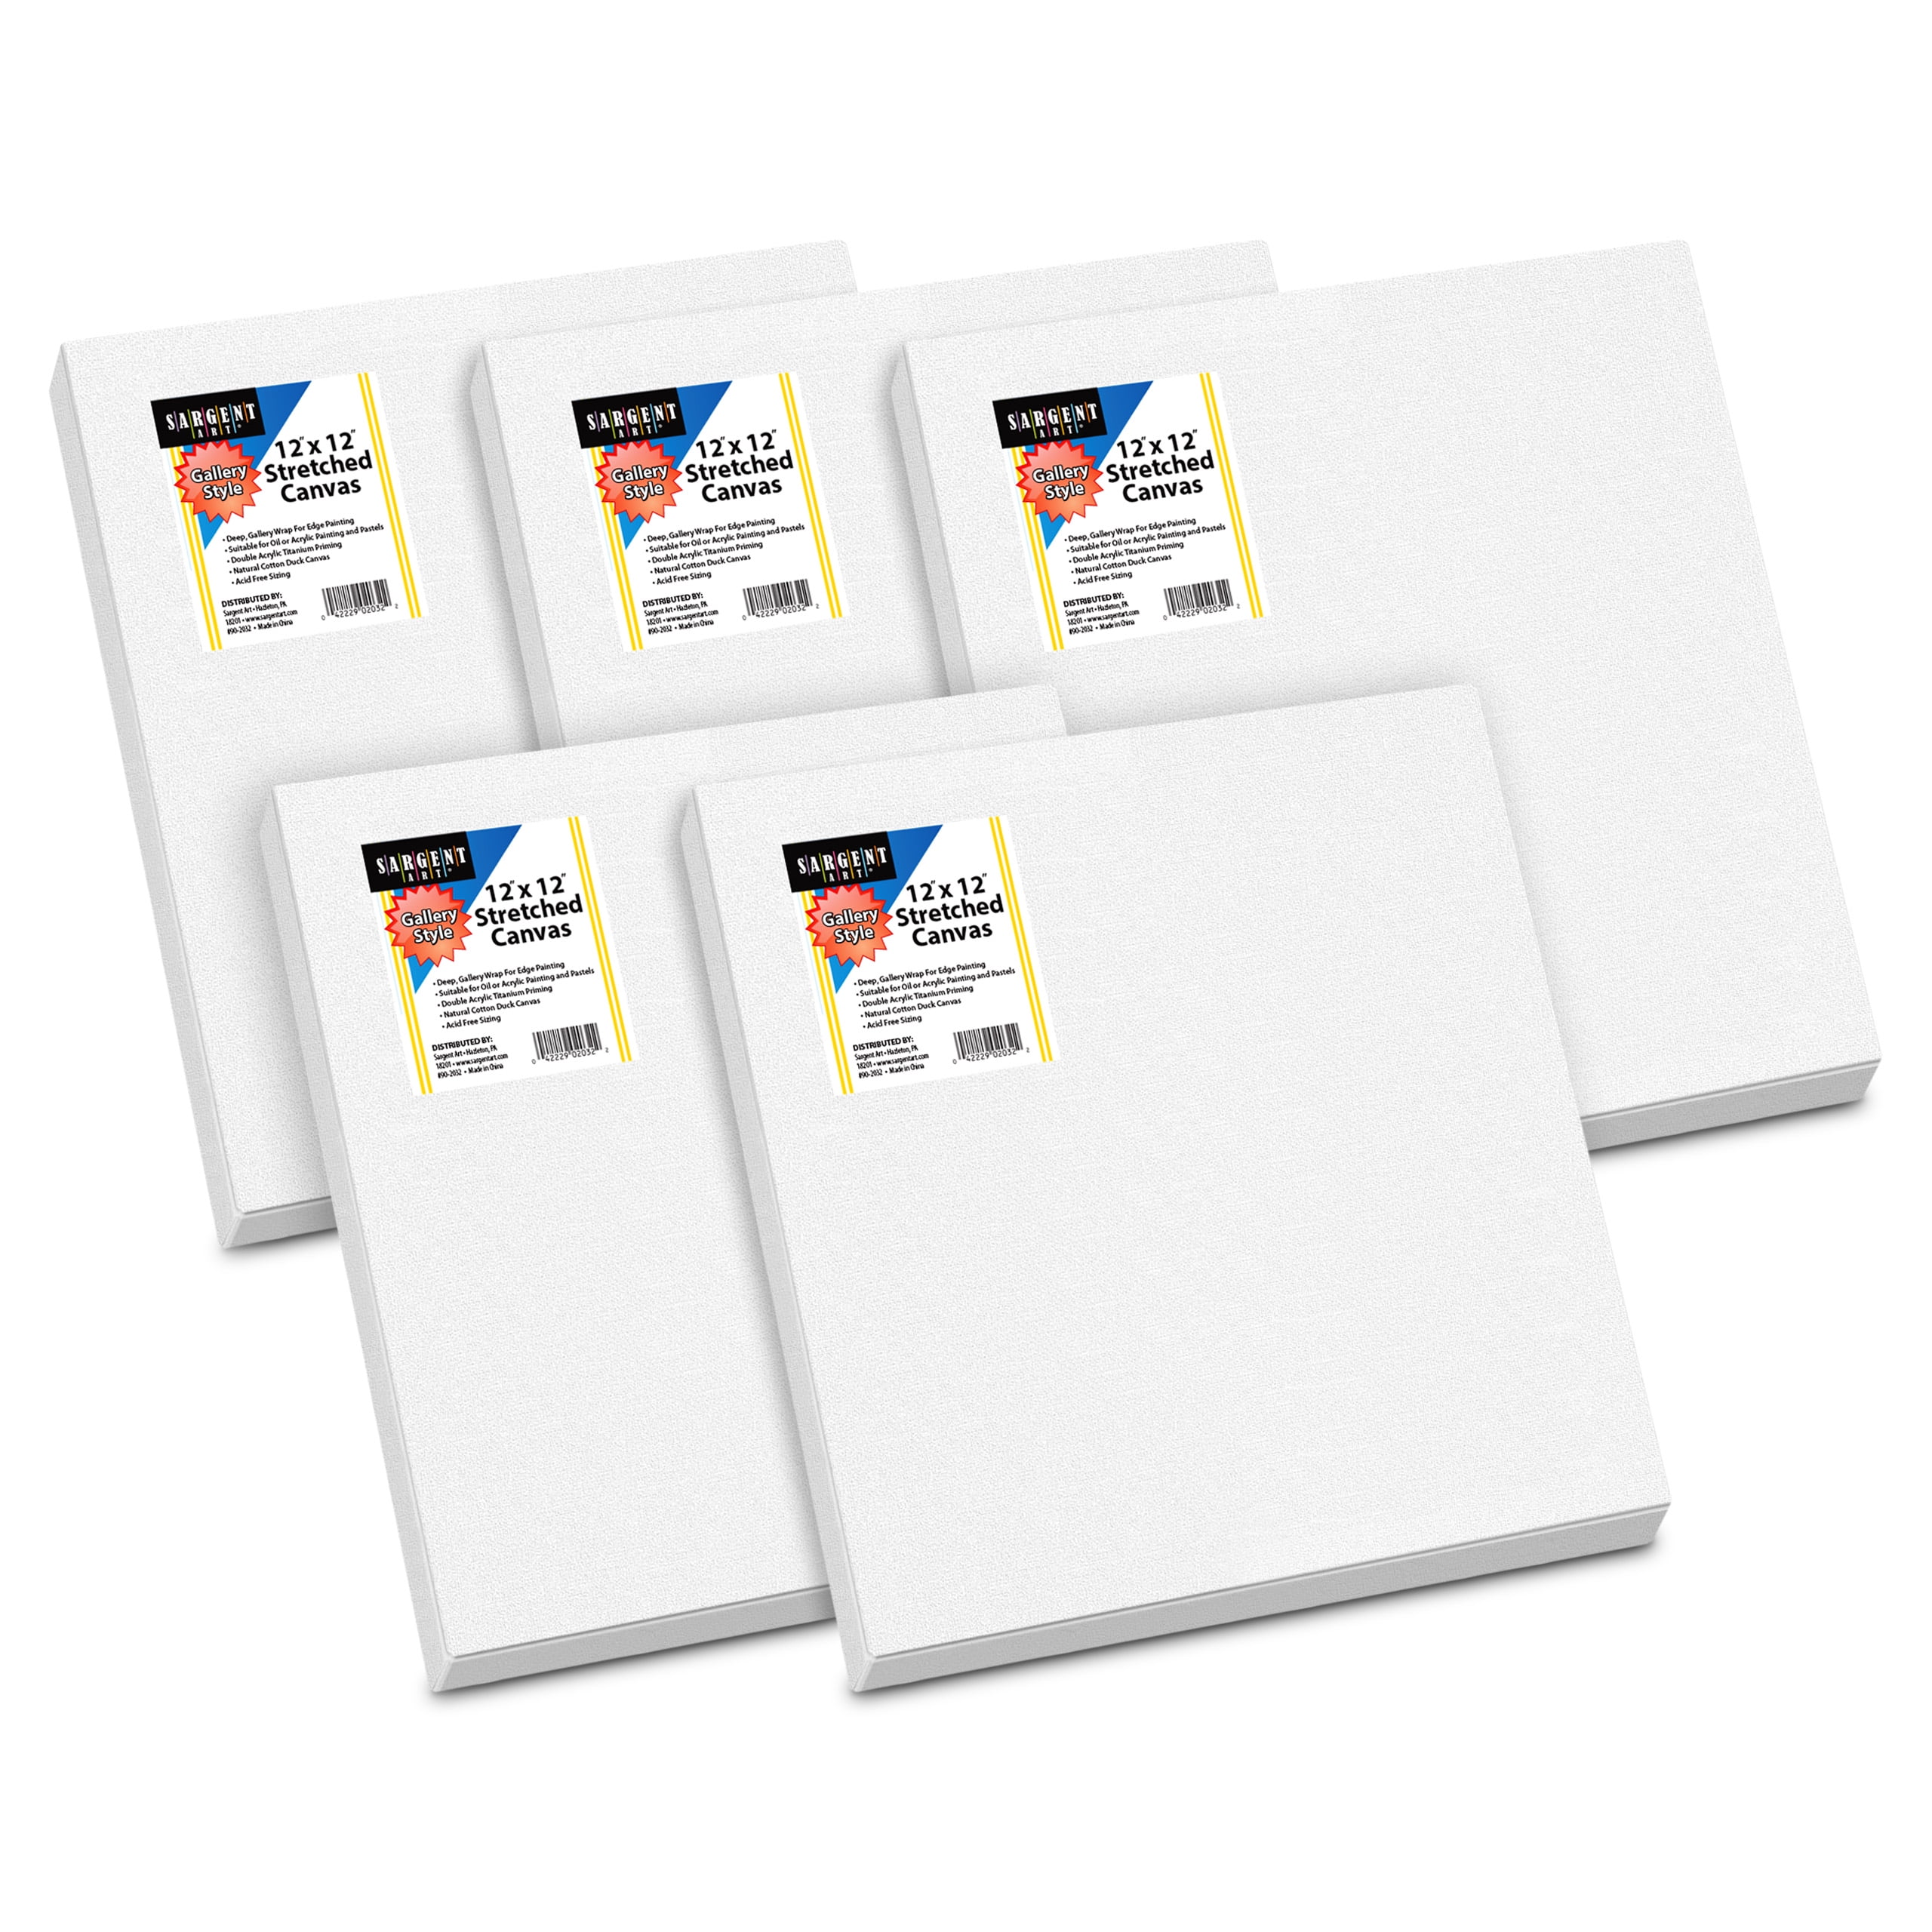 Sargent Art 11 x 14 inch Non Stretched Canvas Panel Acrylic Pouring & Wet Media and Art Projects Blank White Canvases Perfect for Acrylic Oil Double Acrylic Titanium Priming 